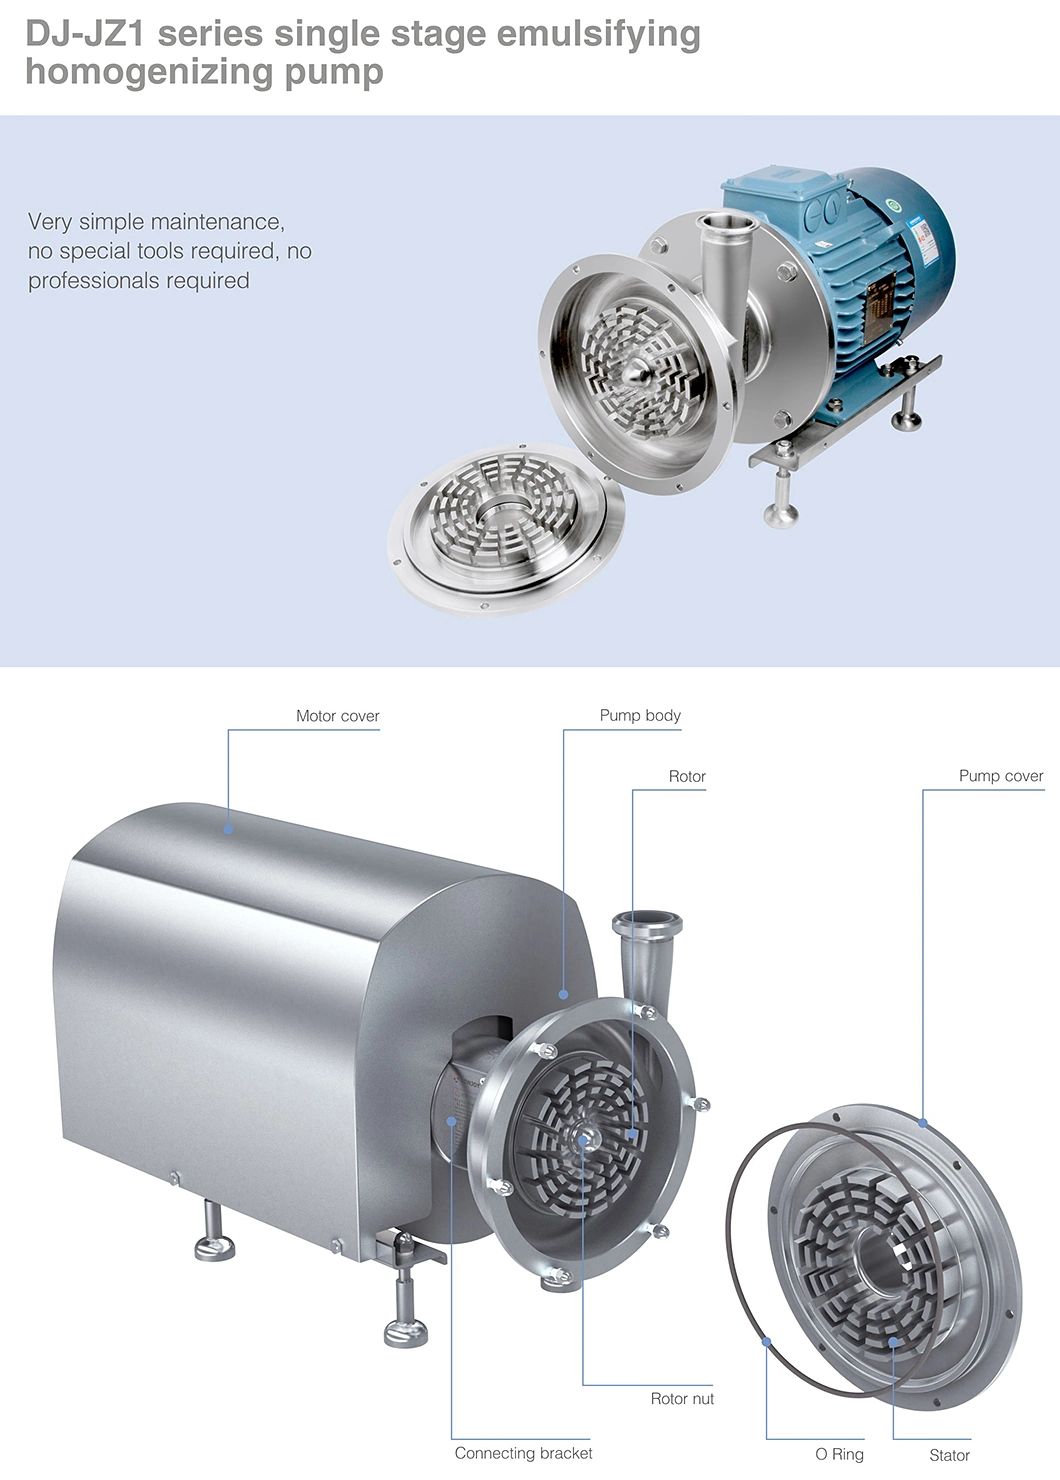 3A Stainless Steel Emulsifying Homogenizing Pump for Dairy Processing